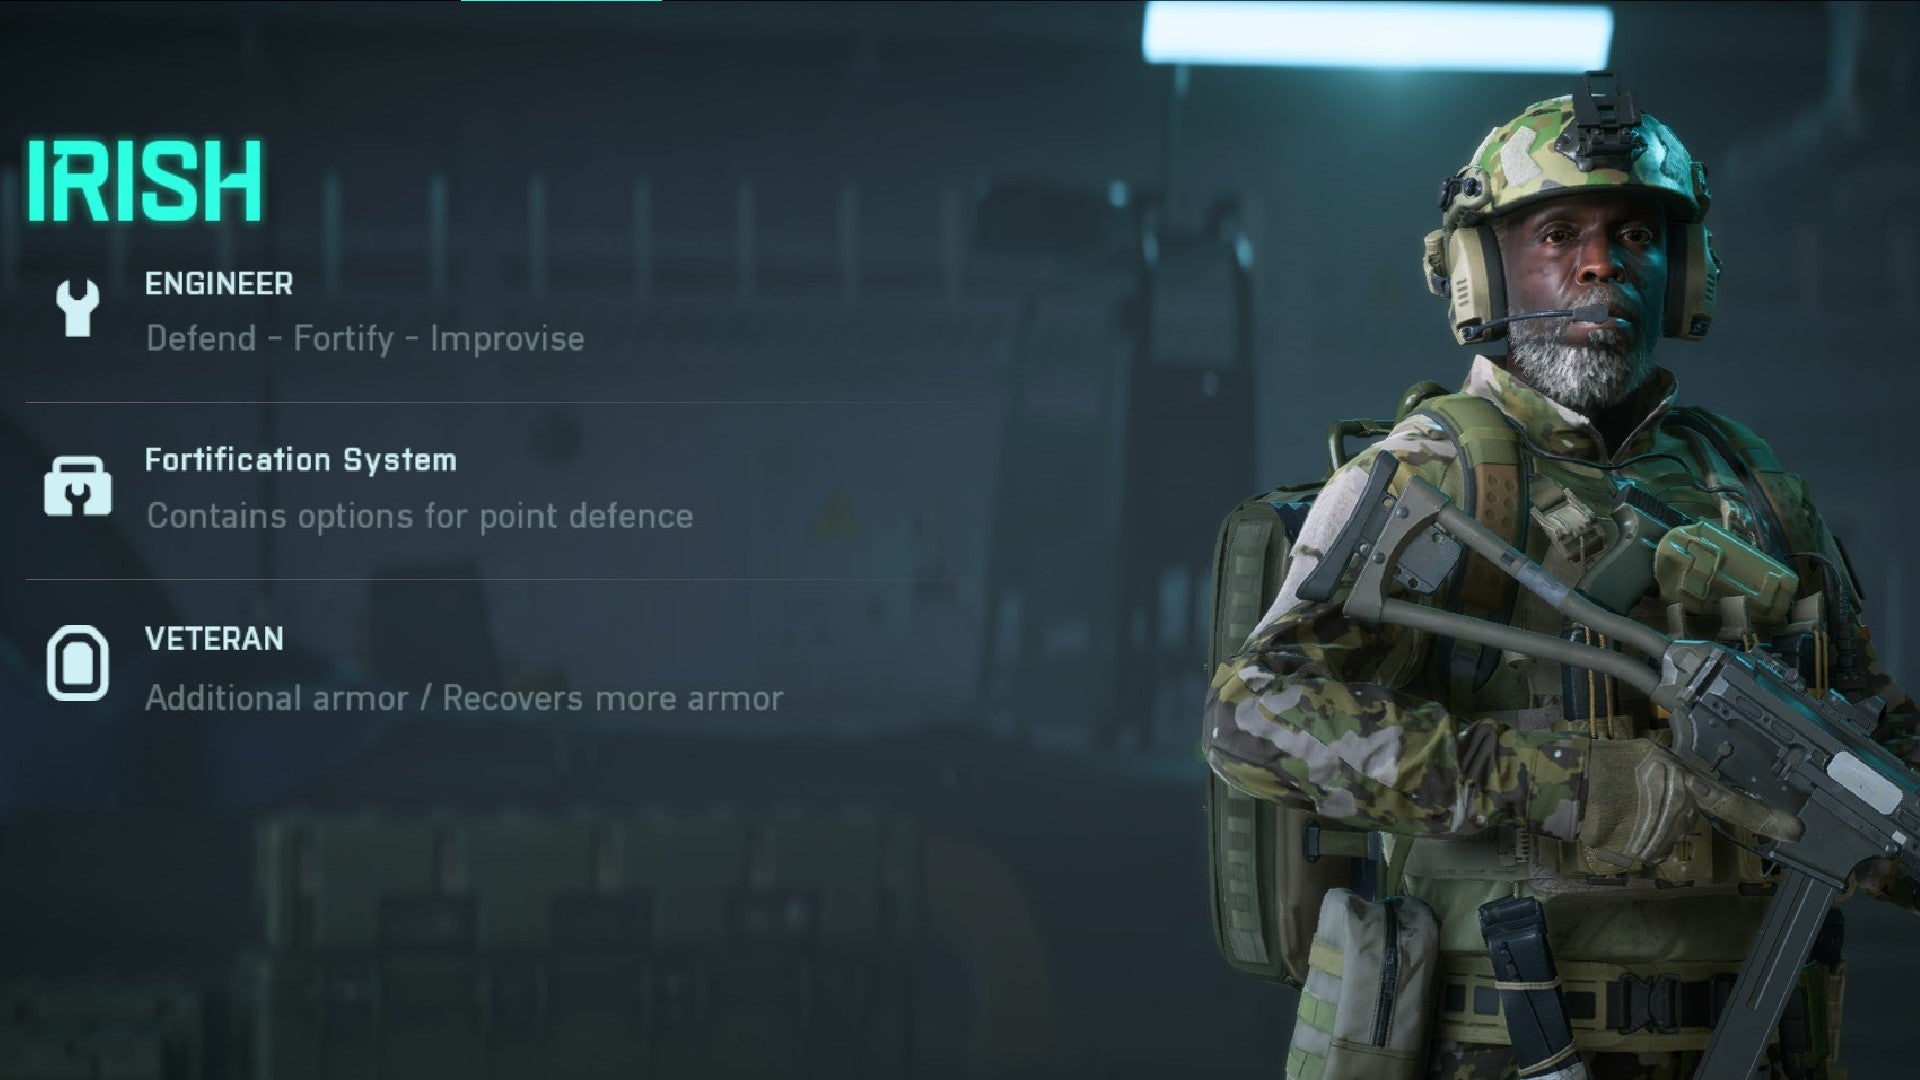 Irish stood holding an SMG in the specialist selection menu. Text on the left describes his abilities.